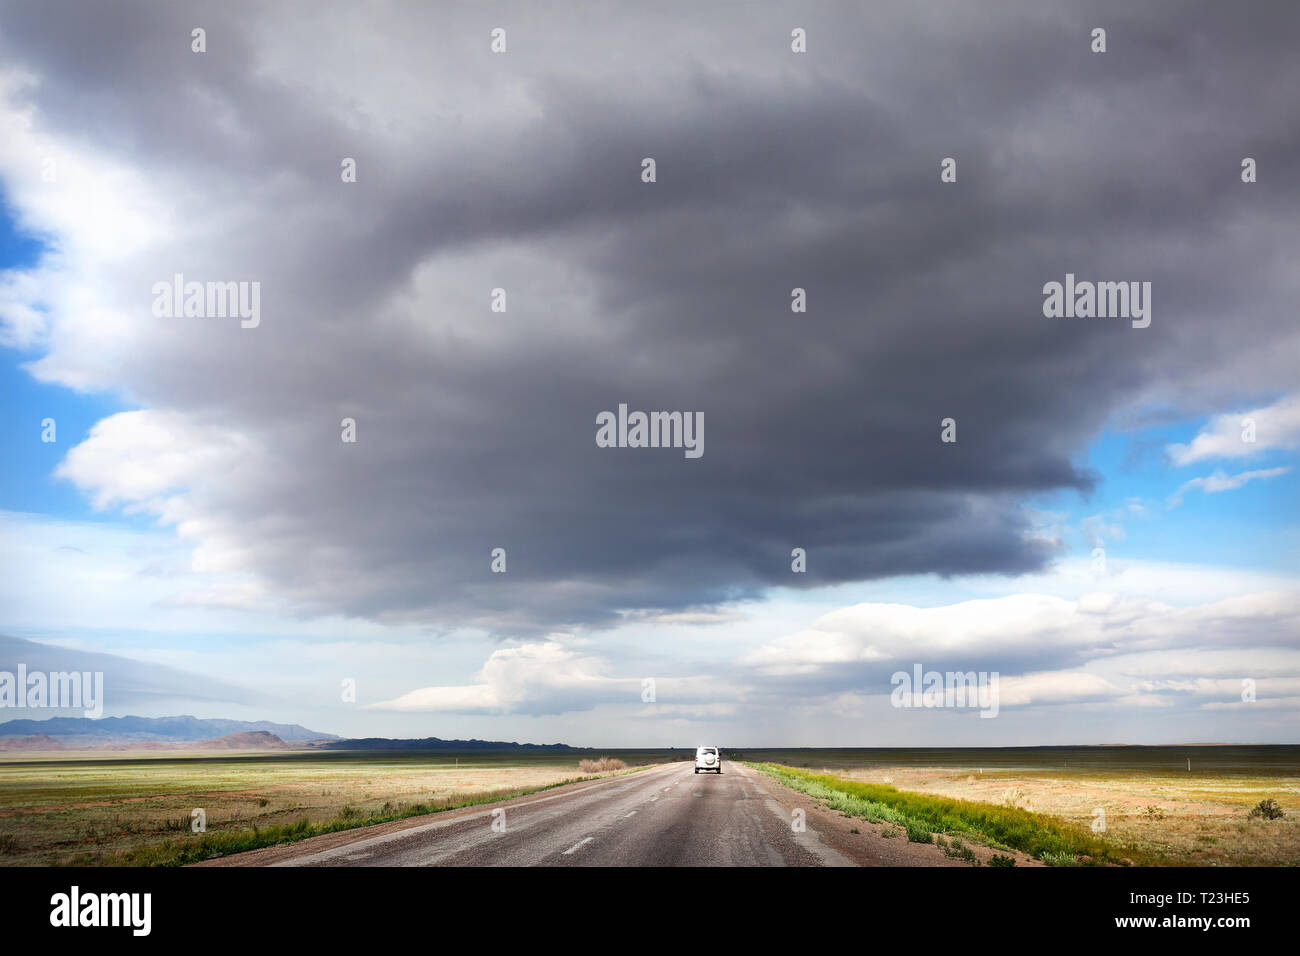 Highway road and lonely car in the desert at overcast sky background Stock Photo